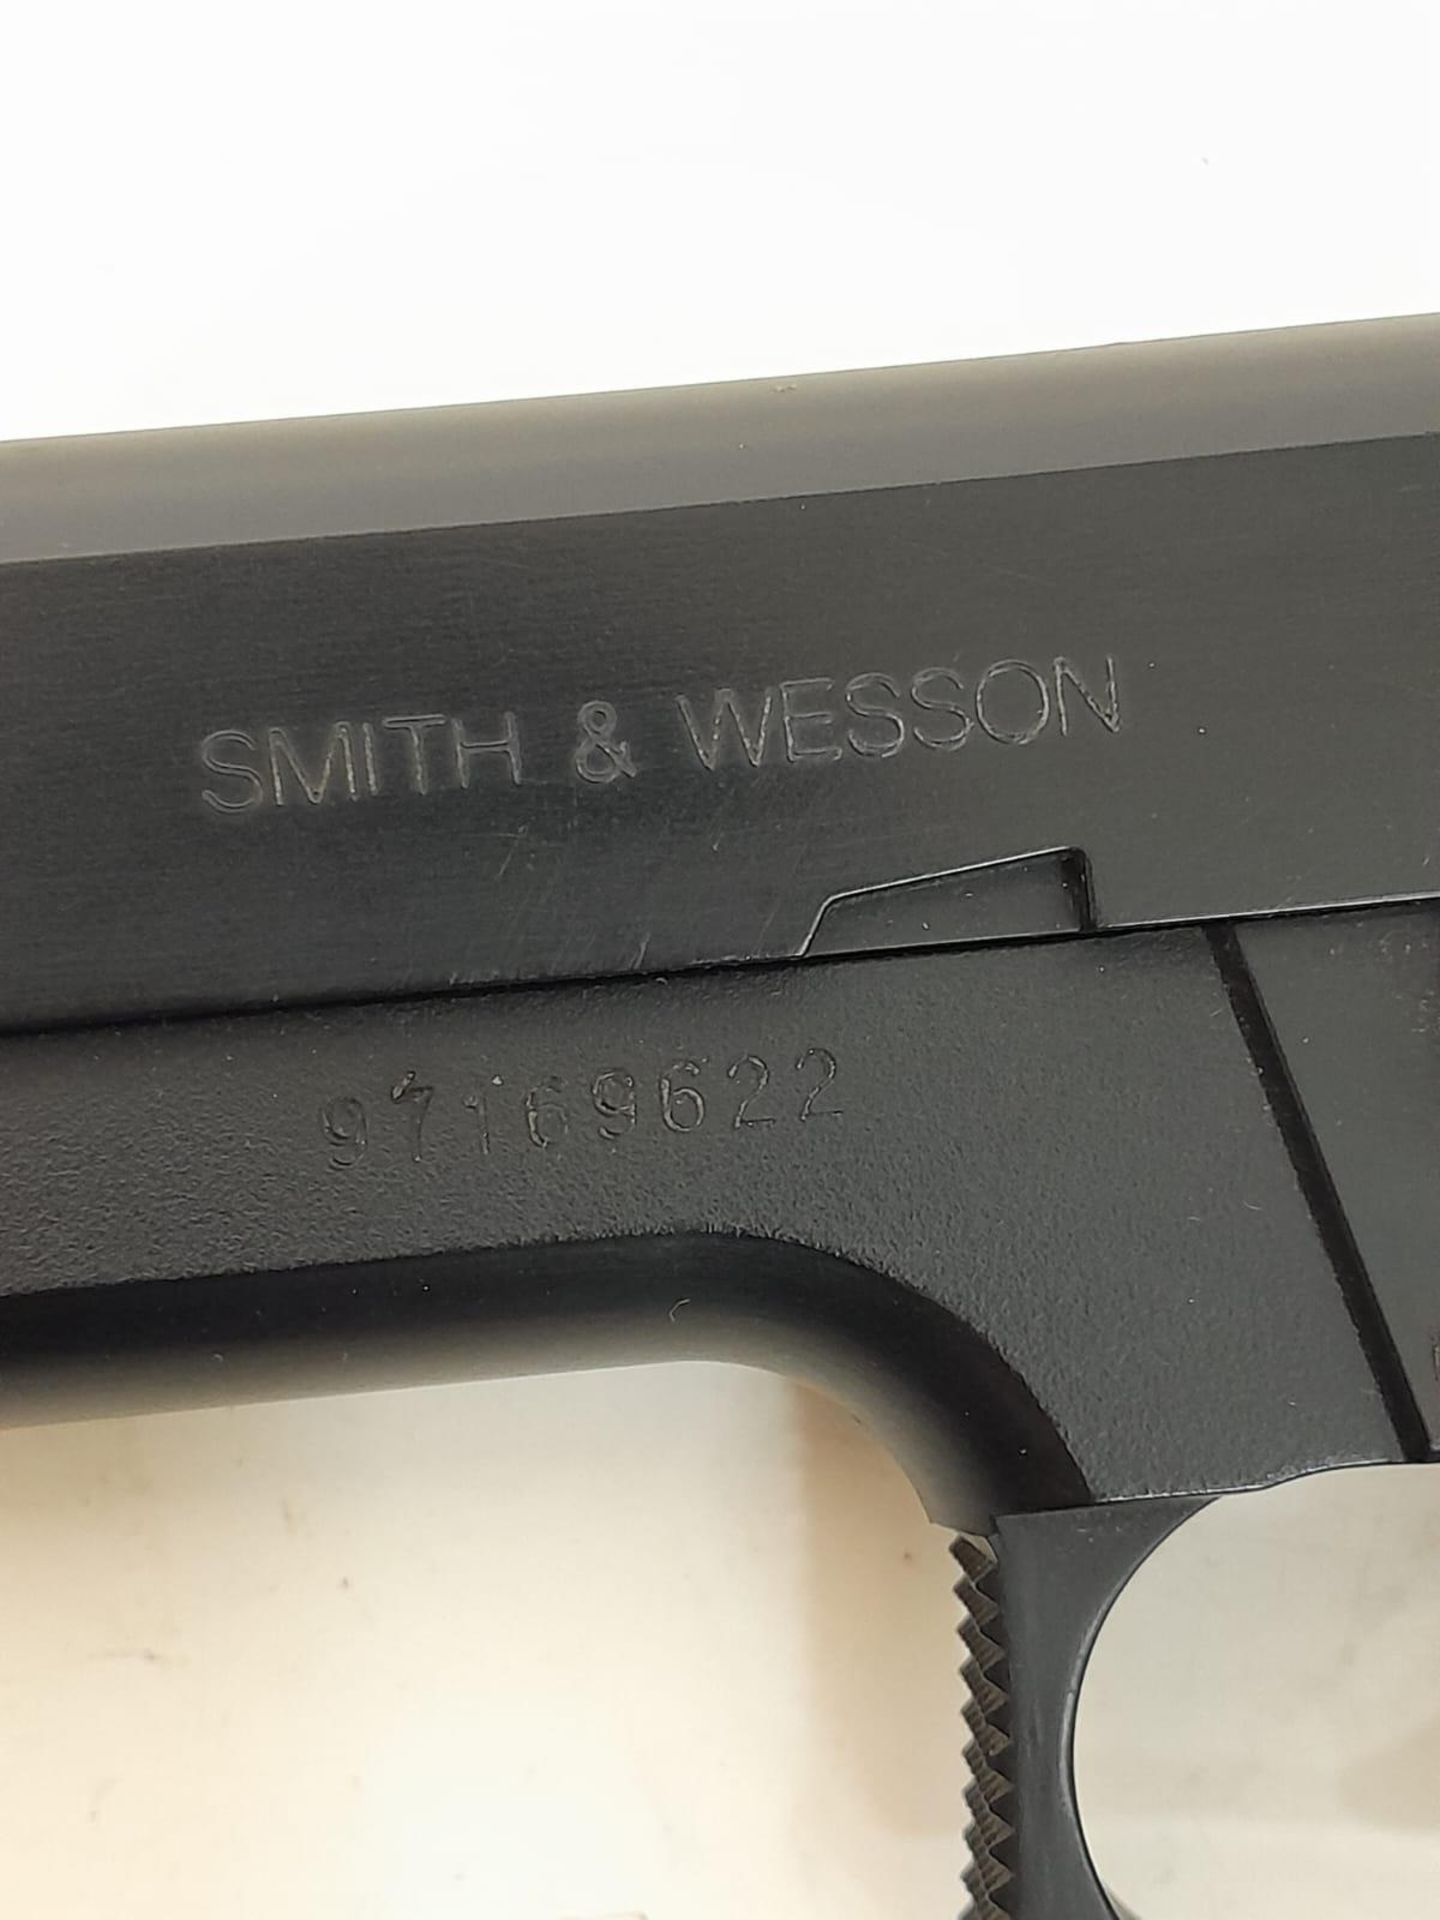 A Smith and Wesson Soft Air 6mm BB Air Pistol. Full Working Order. Comes with Anglo Arms Holster. UK - Image 4 of 9